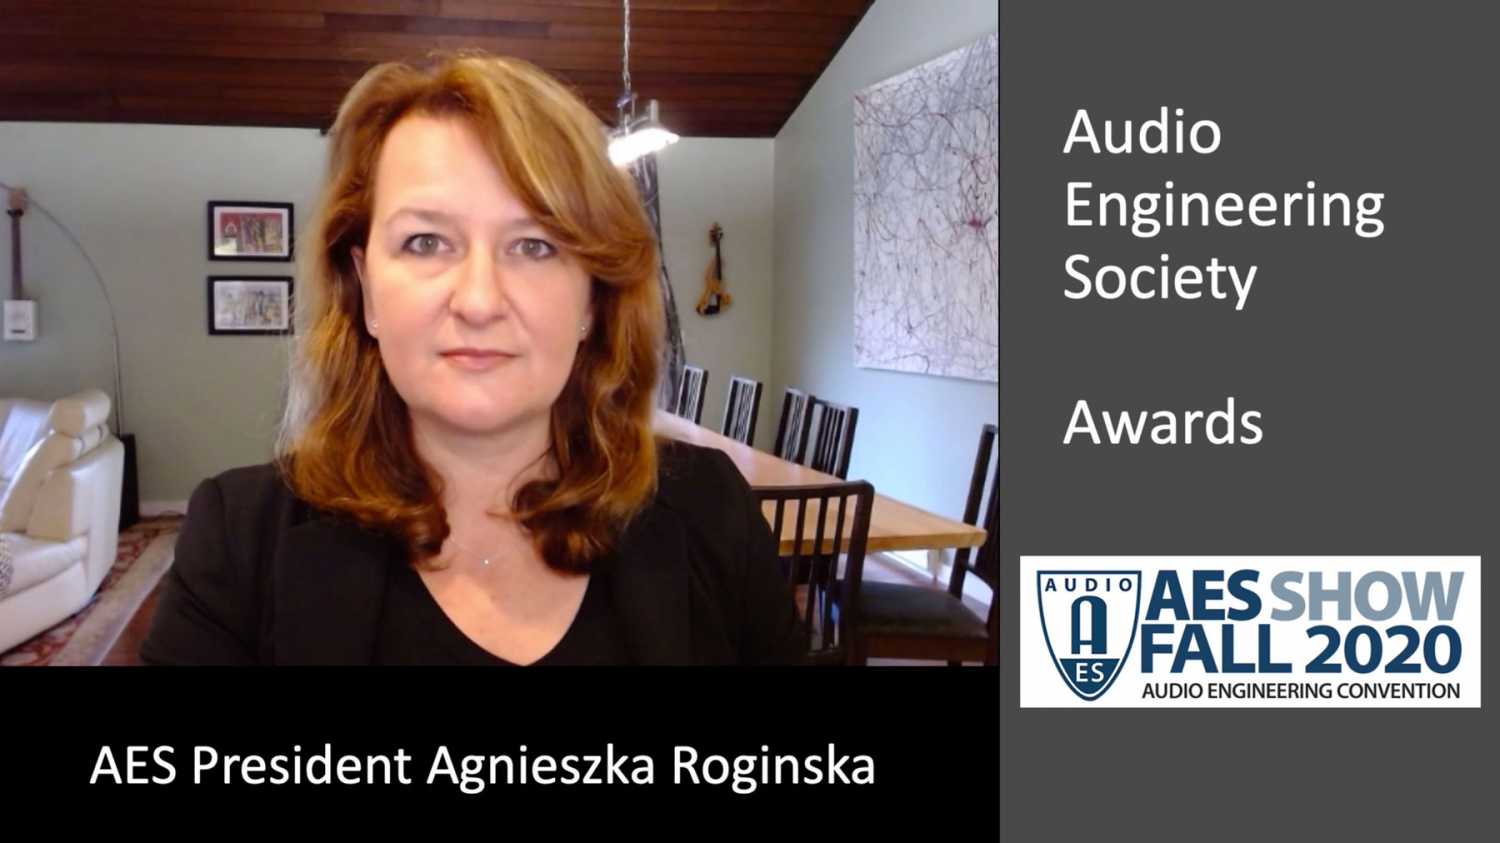 AES President Agnieszka Roginska presents awards for outstanding service and contributions to the Industry